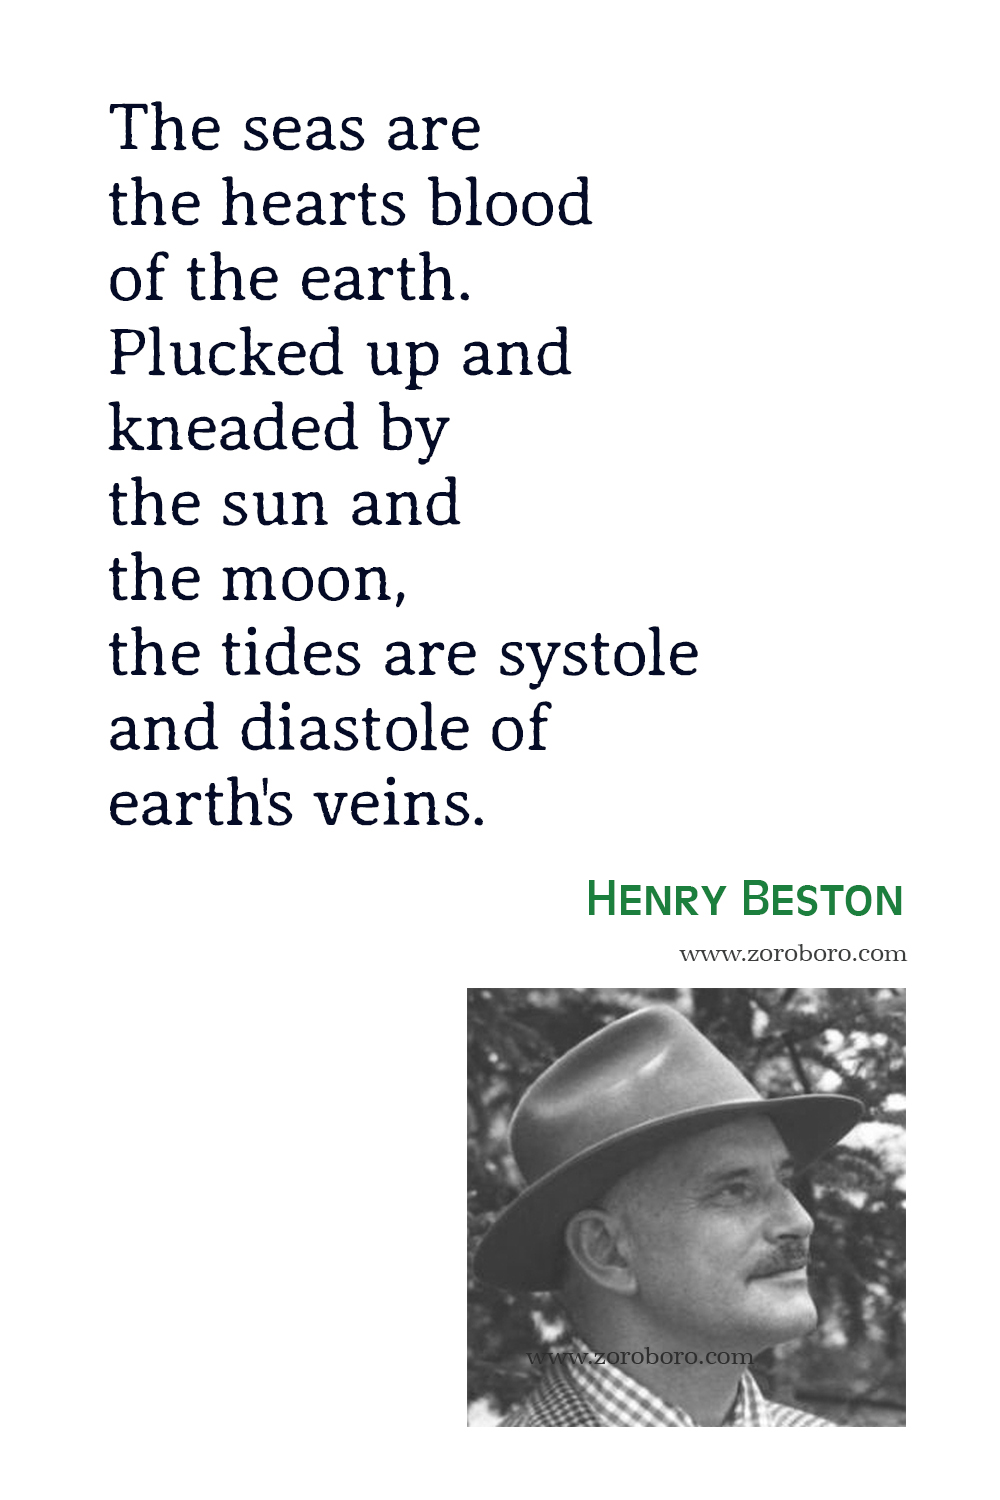 Henry Beston Quotes, Henry Beston The Northern Farm Quotes, Henry Beston The Outermost House Quotes, Henry Beston Books Quotes.